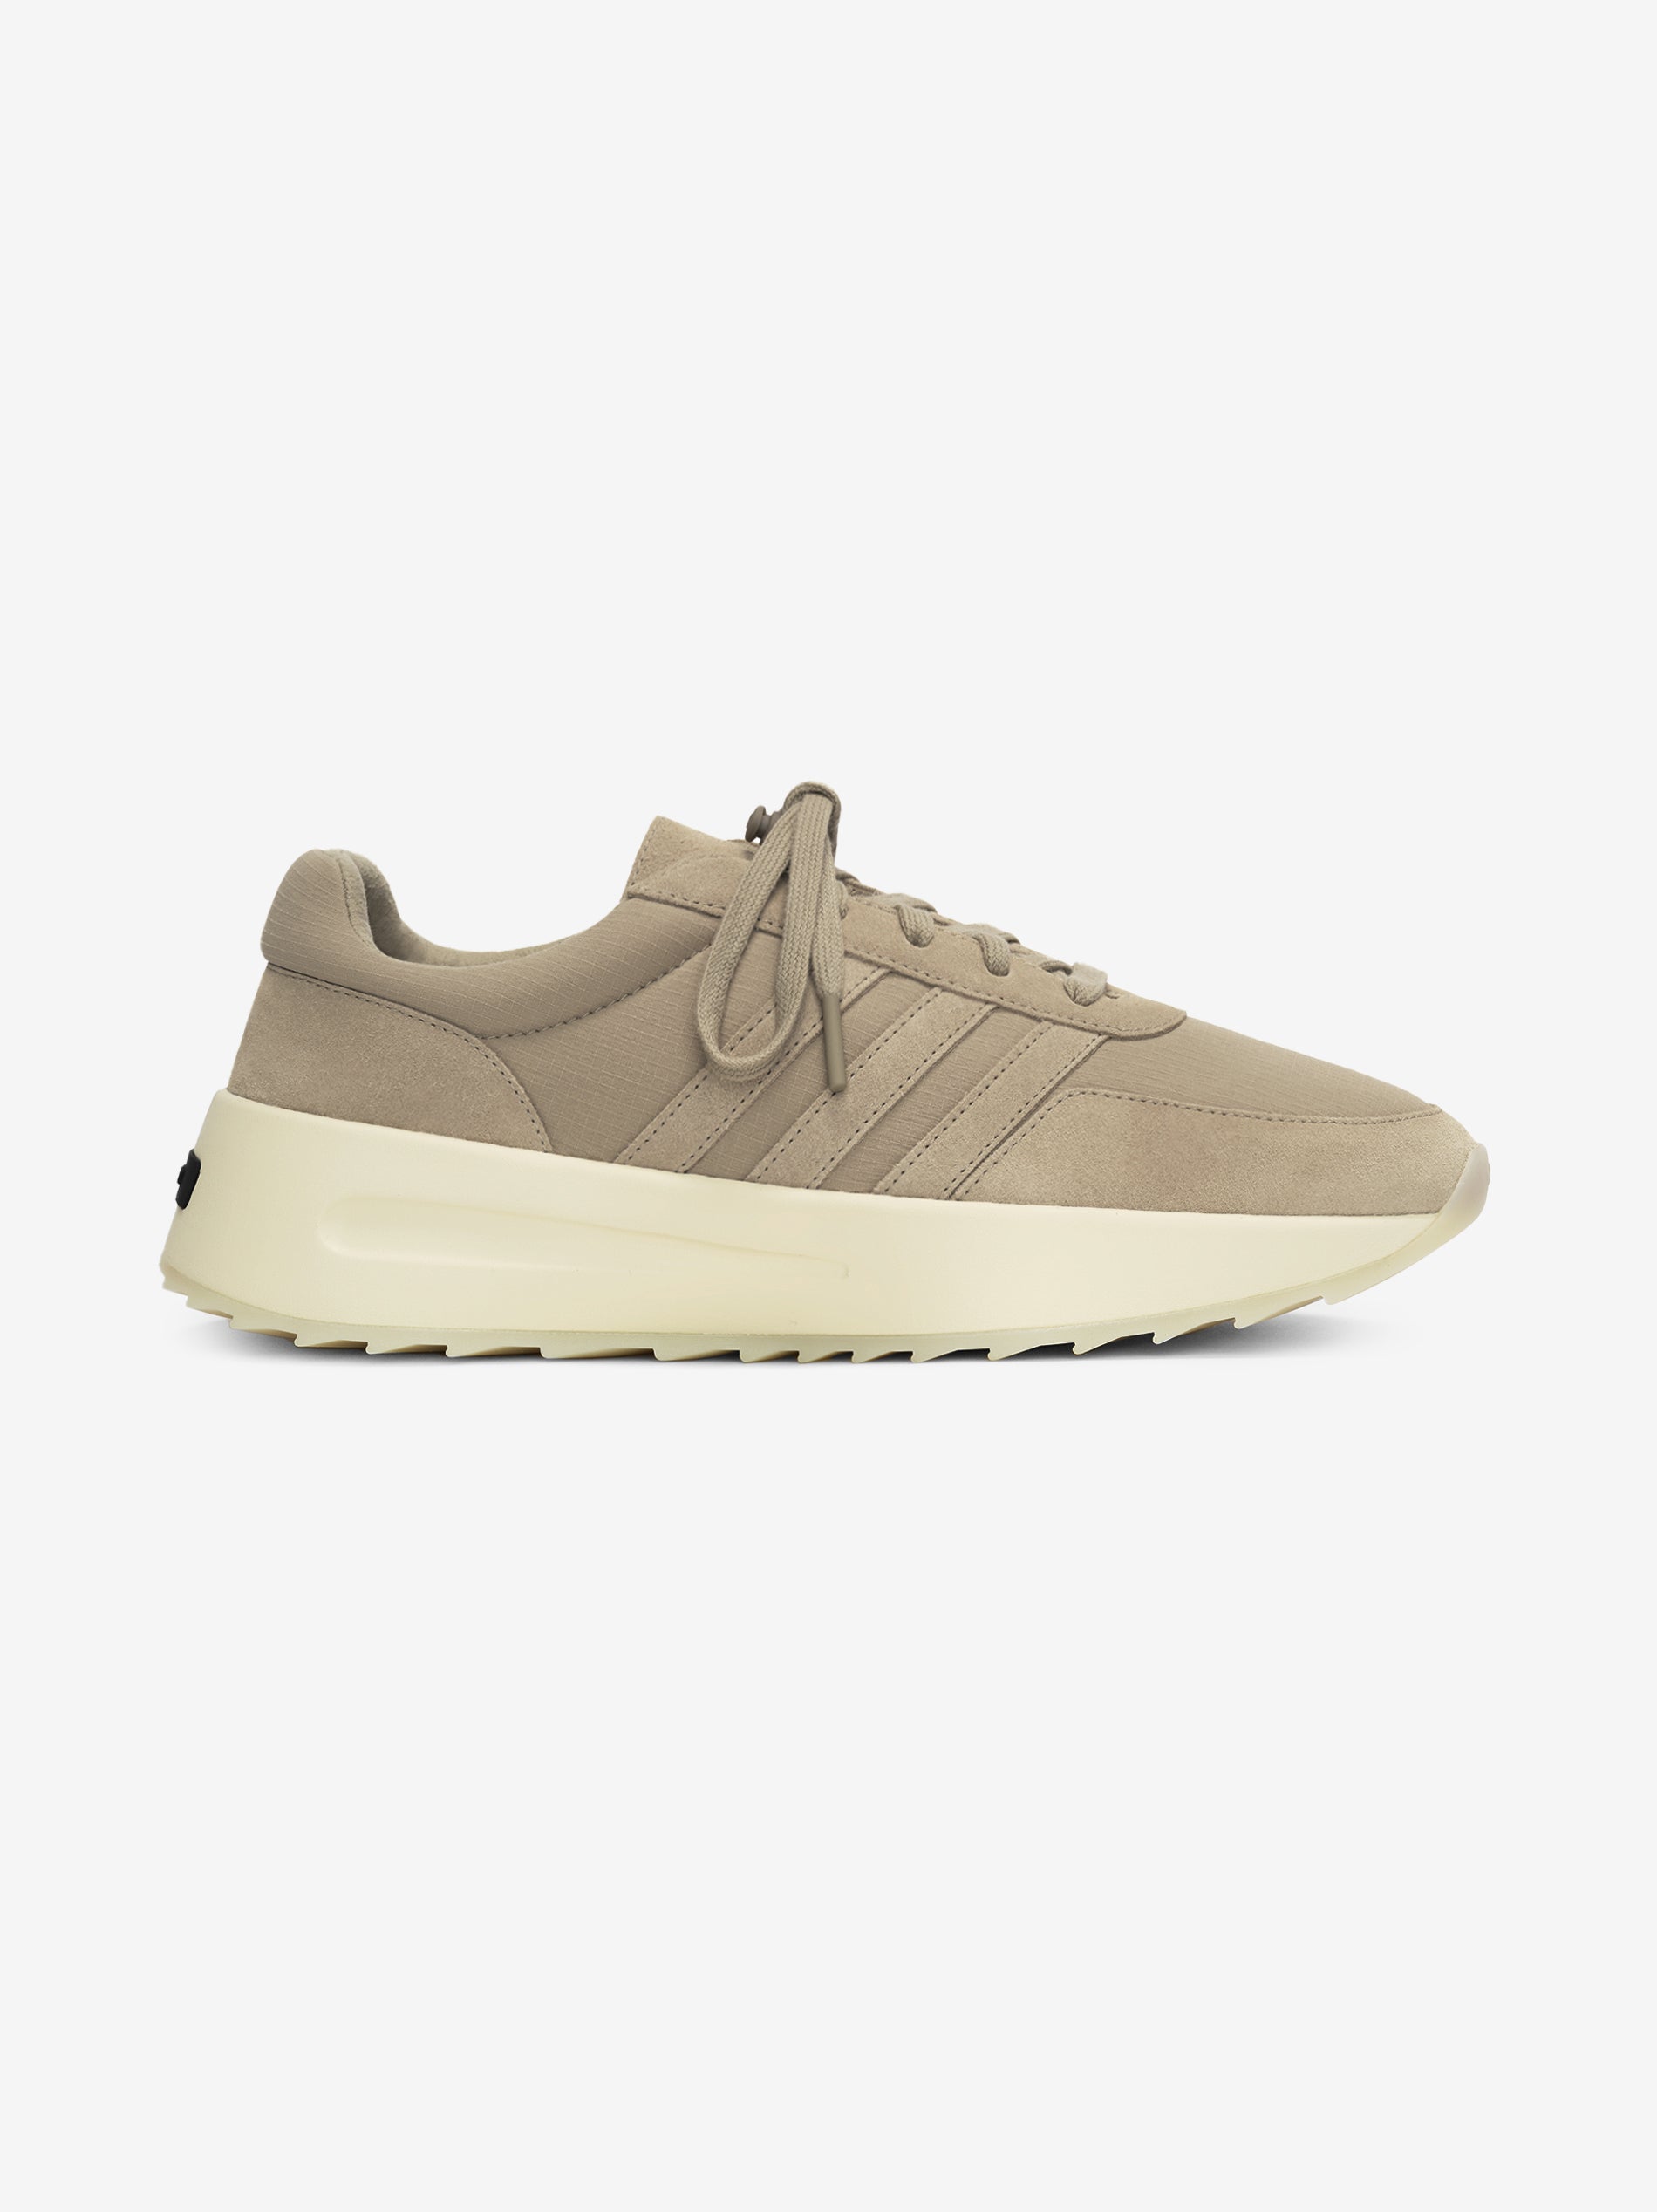 Fear of God Athletics Los Angeles Runner in Clay | Fear of God